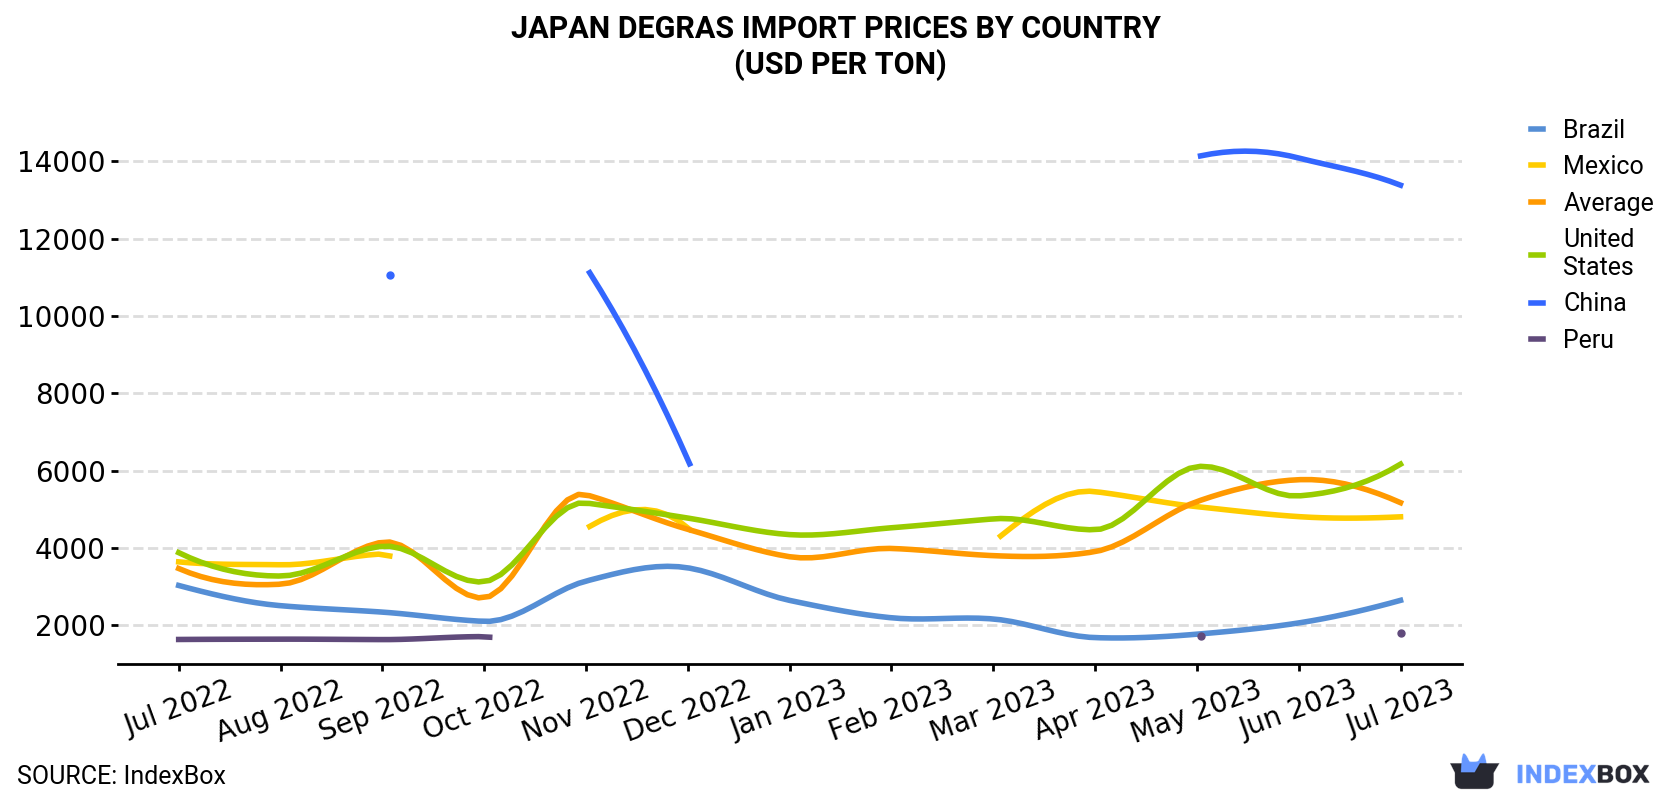 Japan Degras Import Prices By Country (USD Per Ton)